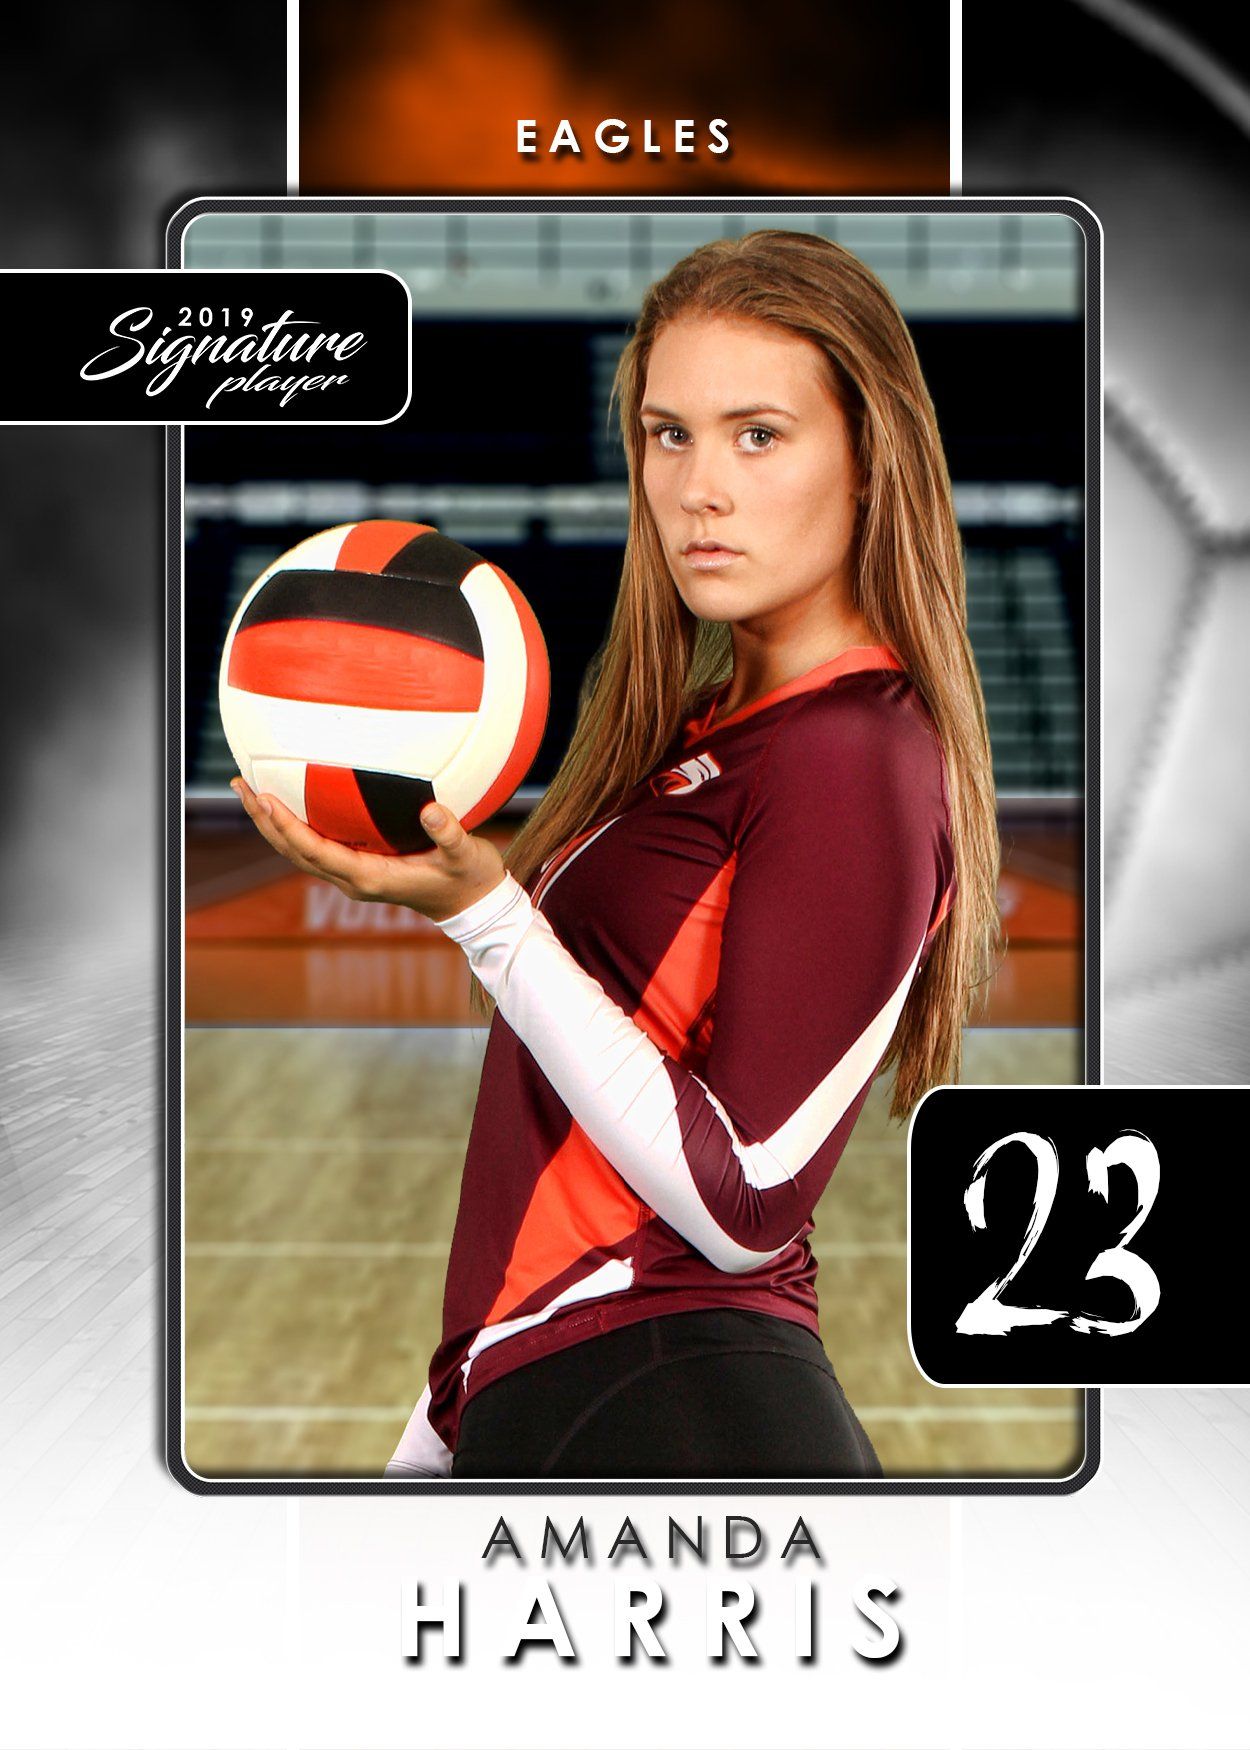 Signature Player - Volleyball - V1 - T&I Drop-In Collection-Photoshop Template - Photo Solutions